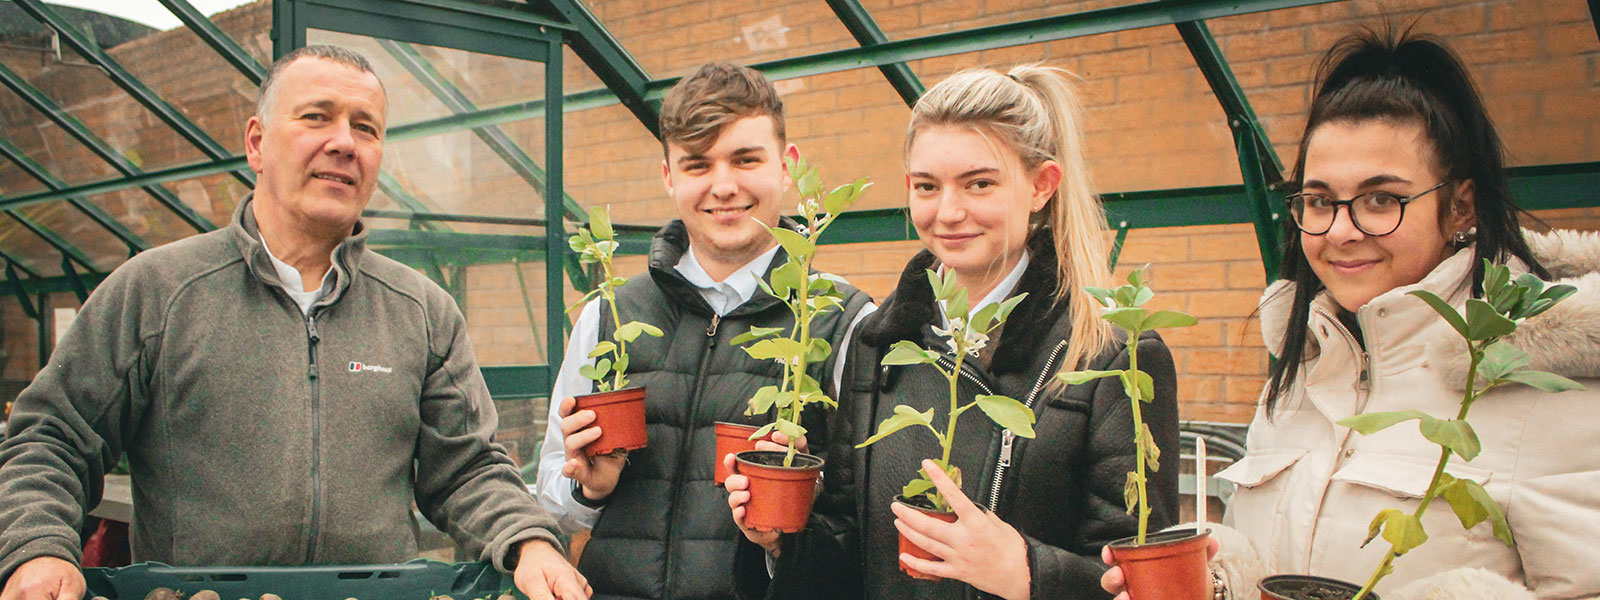 Secondary school students pose with potted plants in a greenhouse